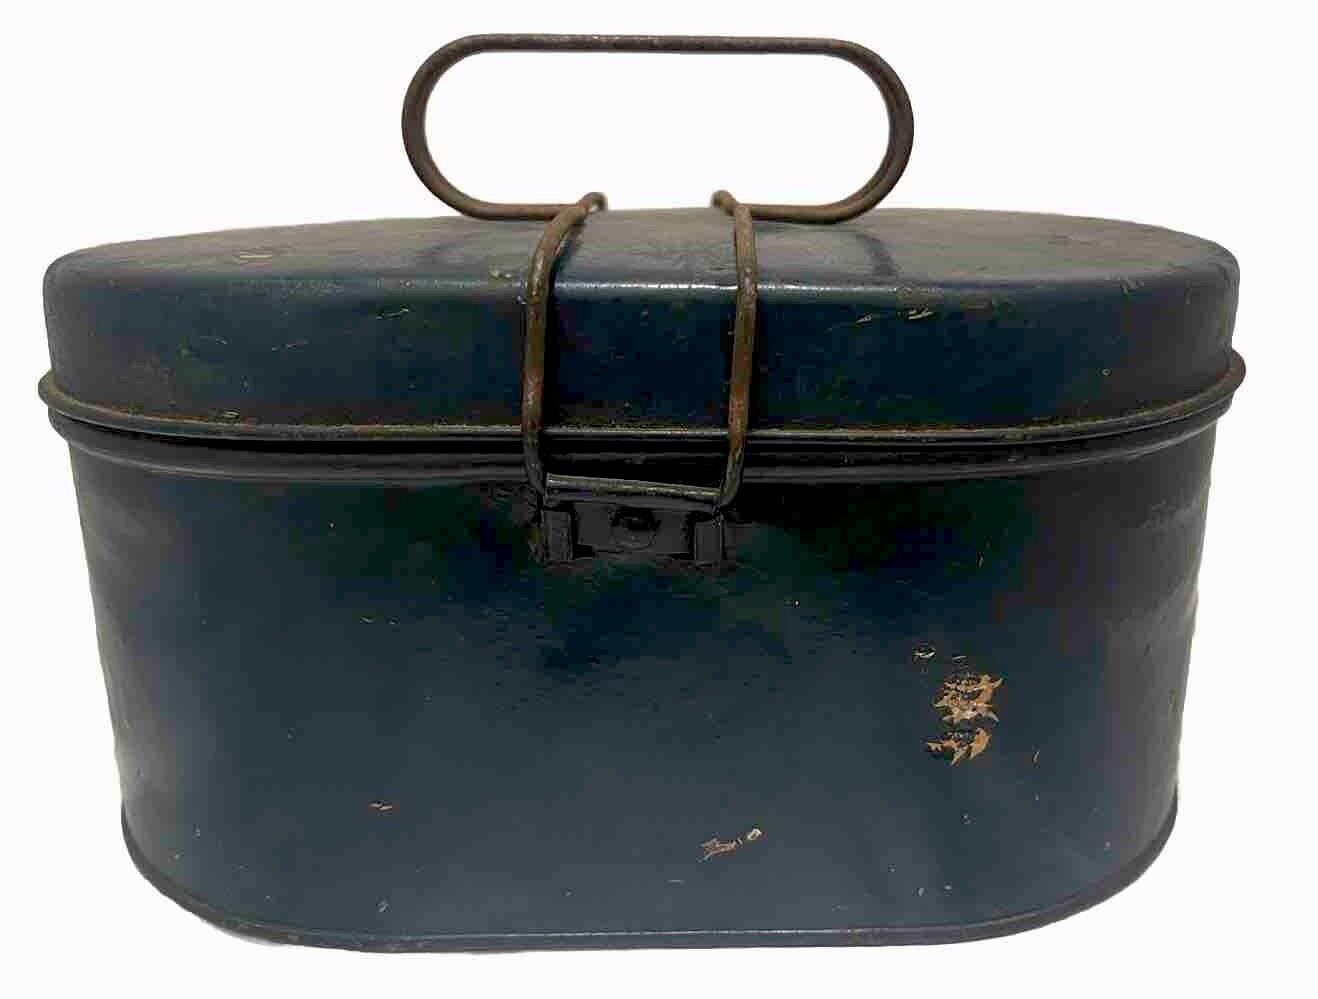 Vintage Handy Oval Lunch Box, Patent No. 1737249 1930's Lunch Box, Blue Color